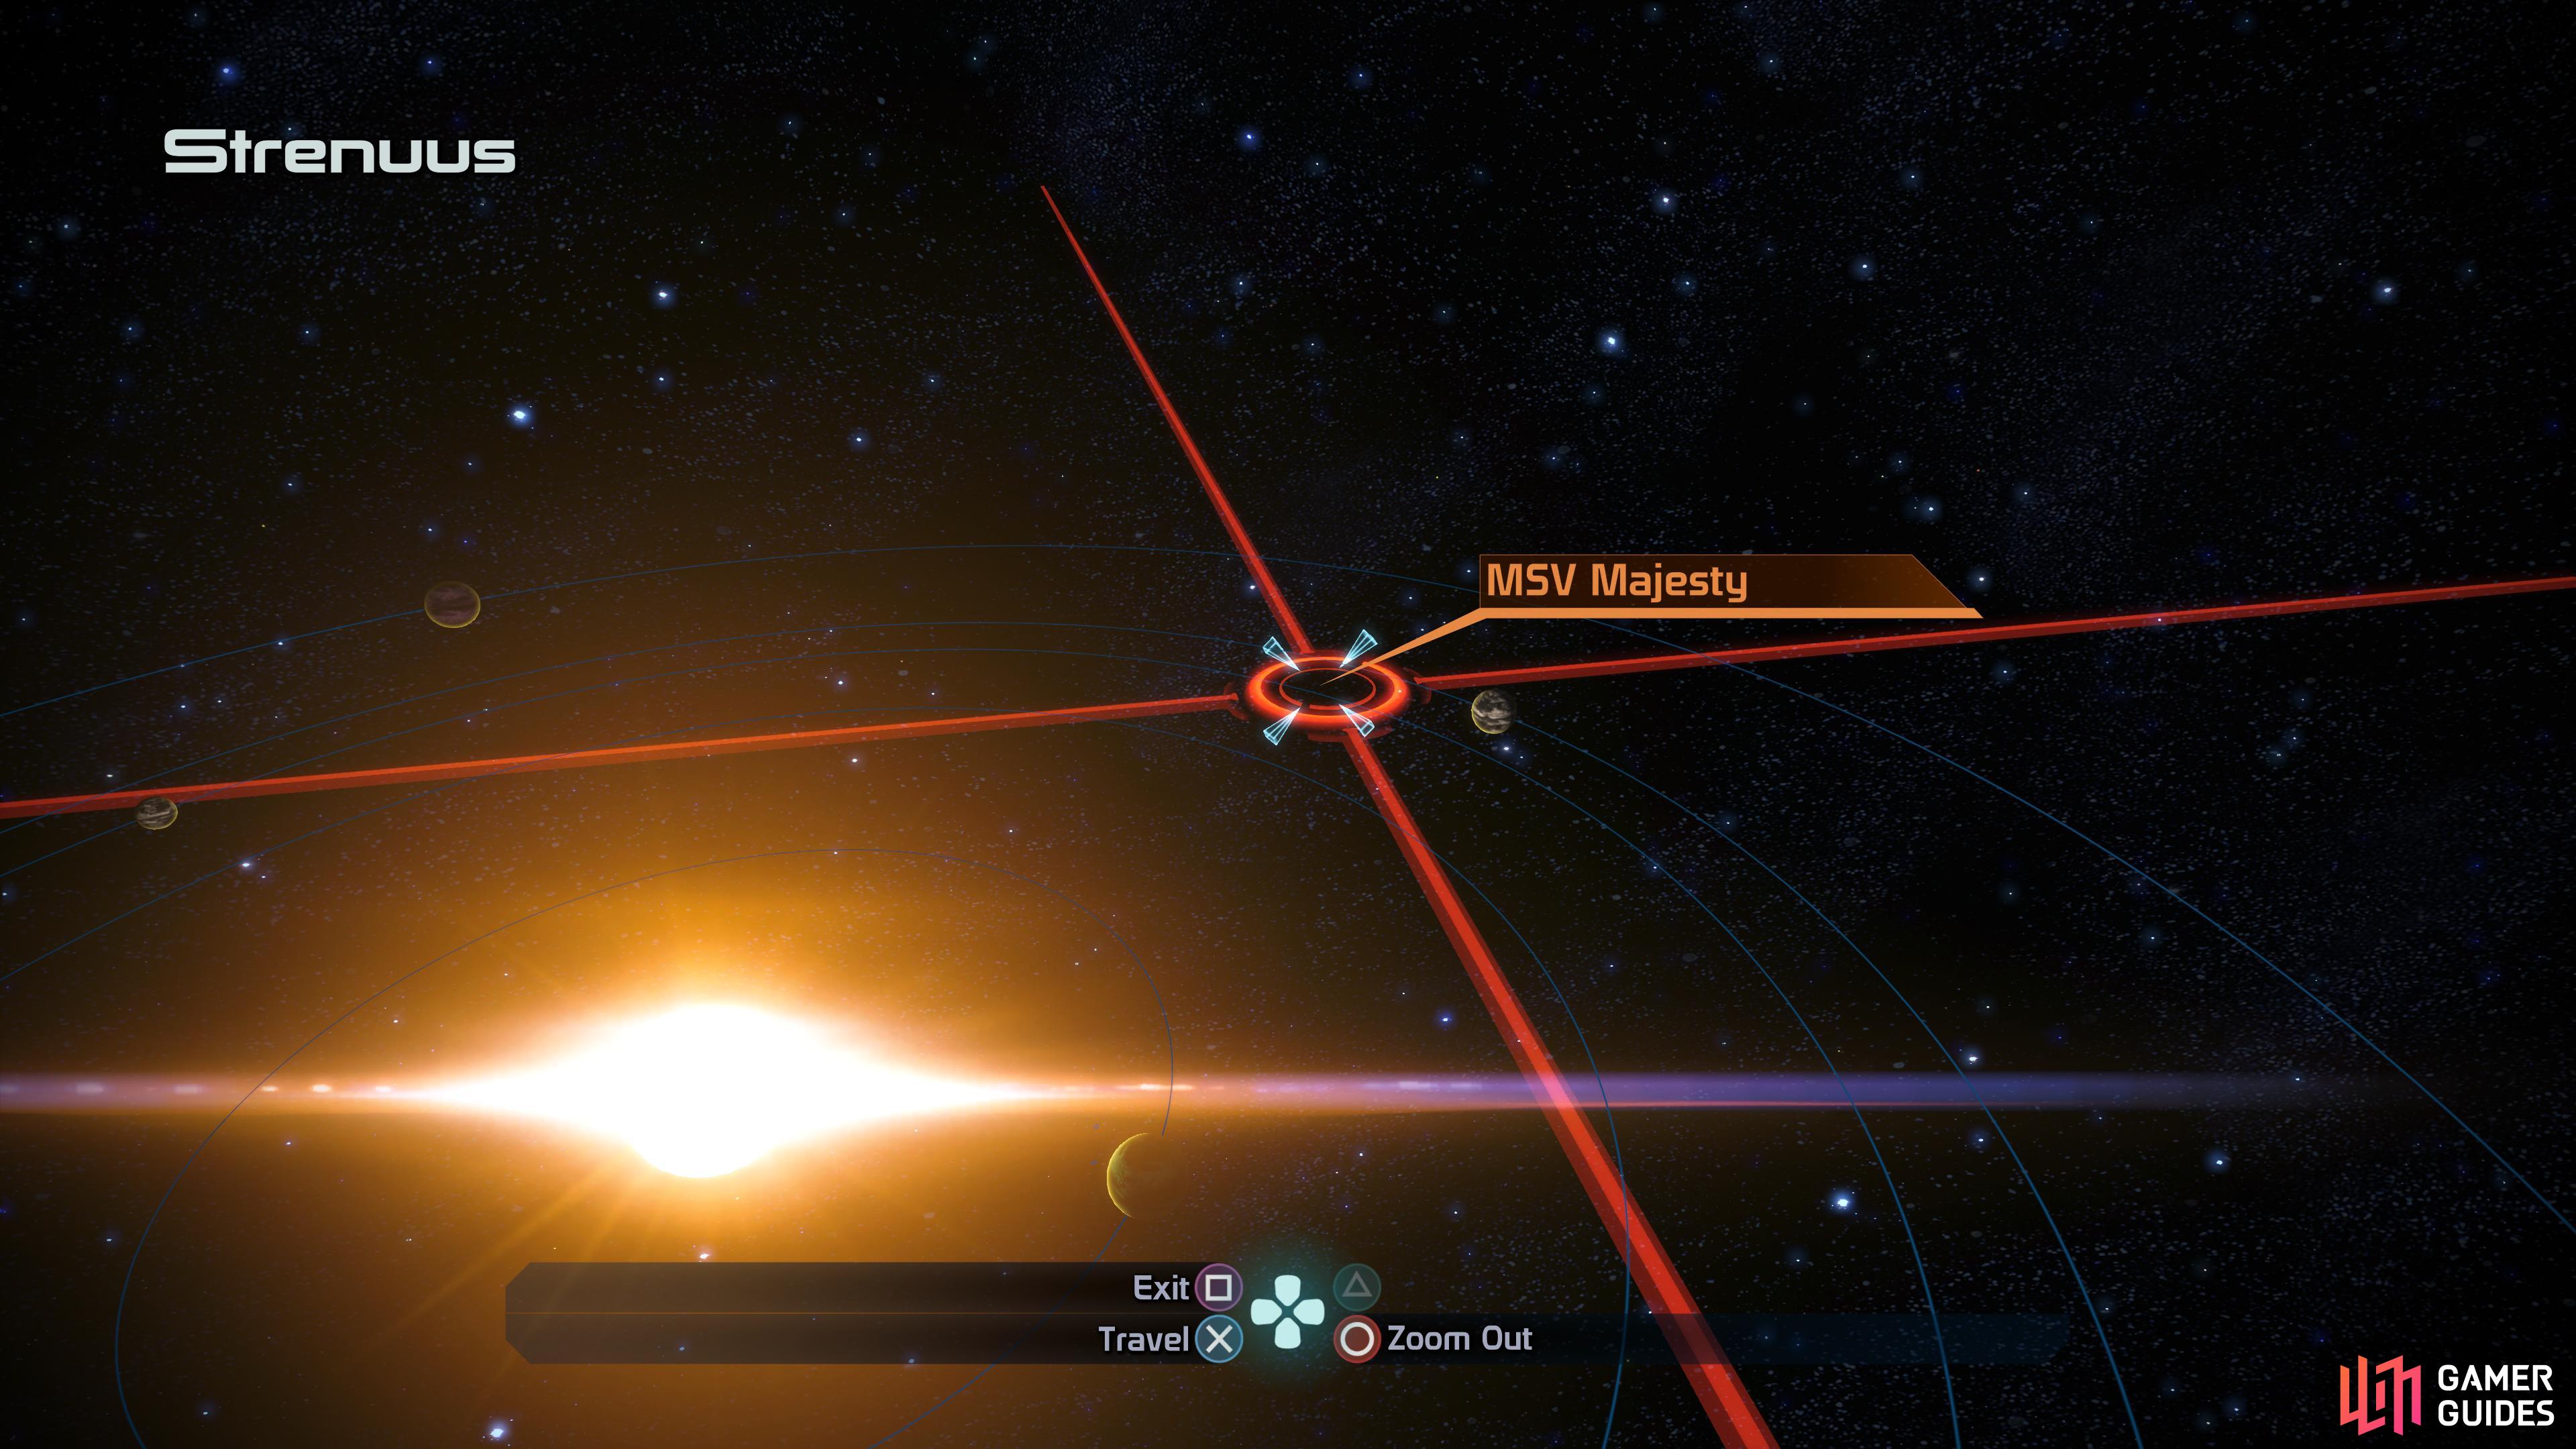 You'll find the sacked MSV Majesty floating around in the Strenuus system.